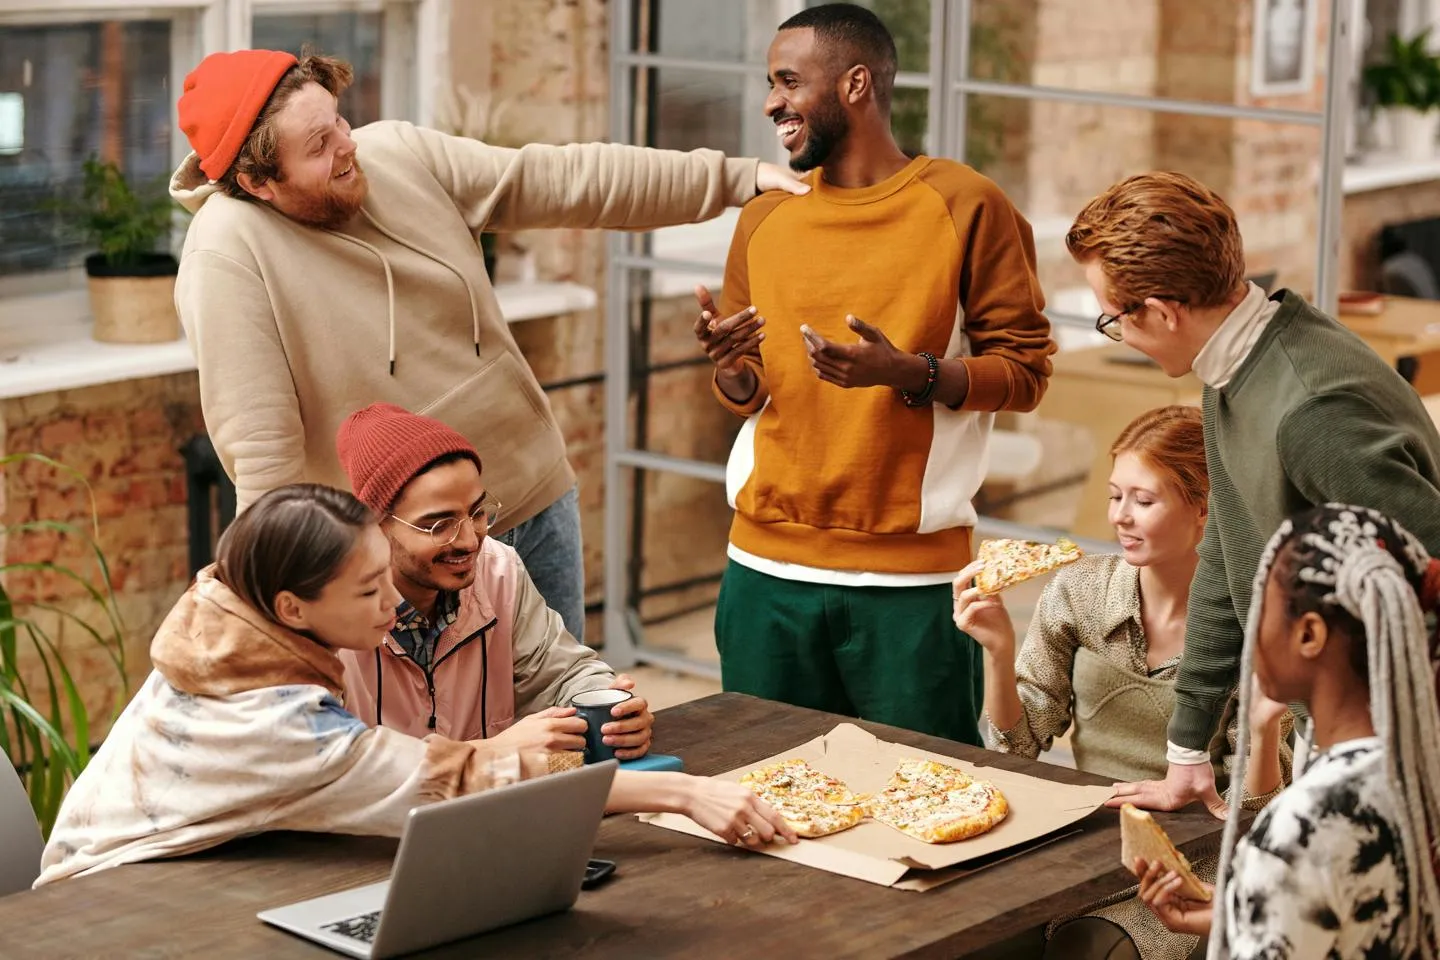 A diverse group of friends enjoy talking to each other over pizza